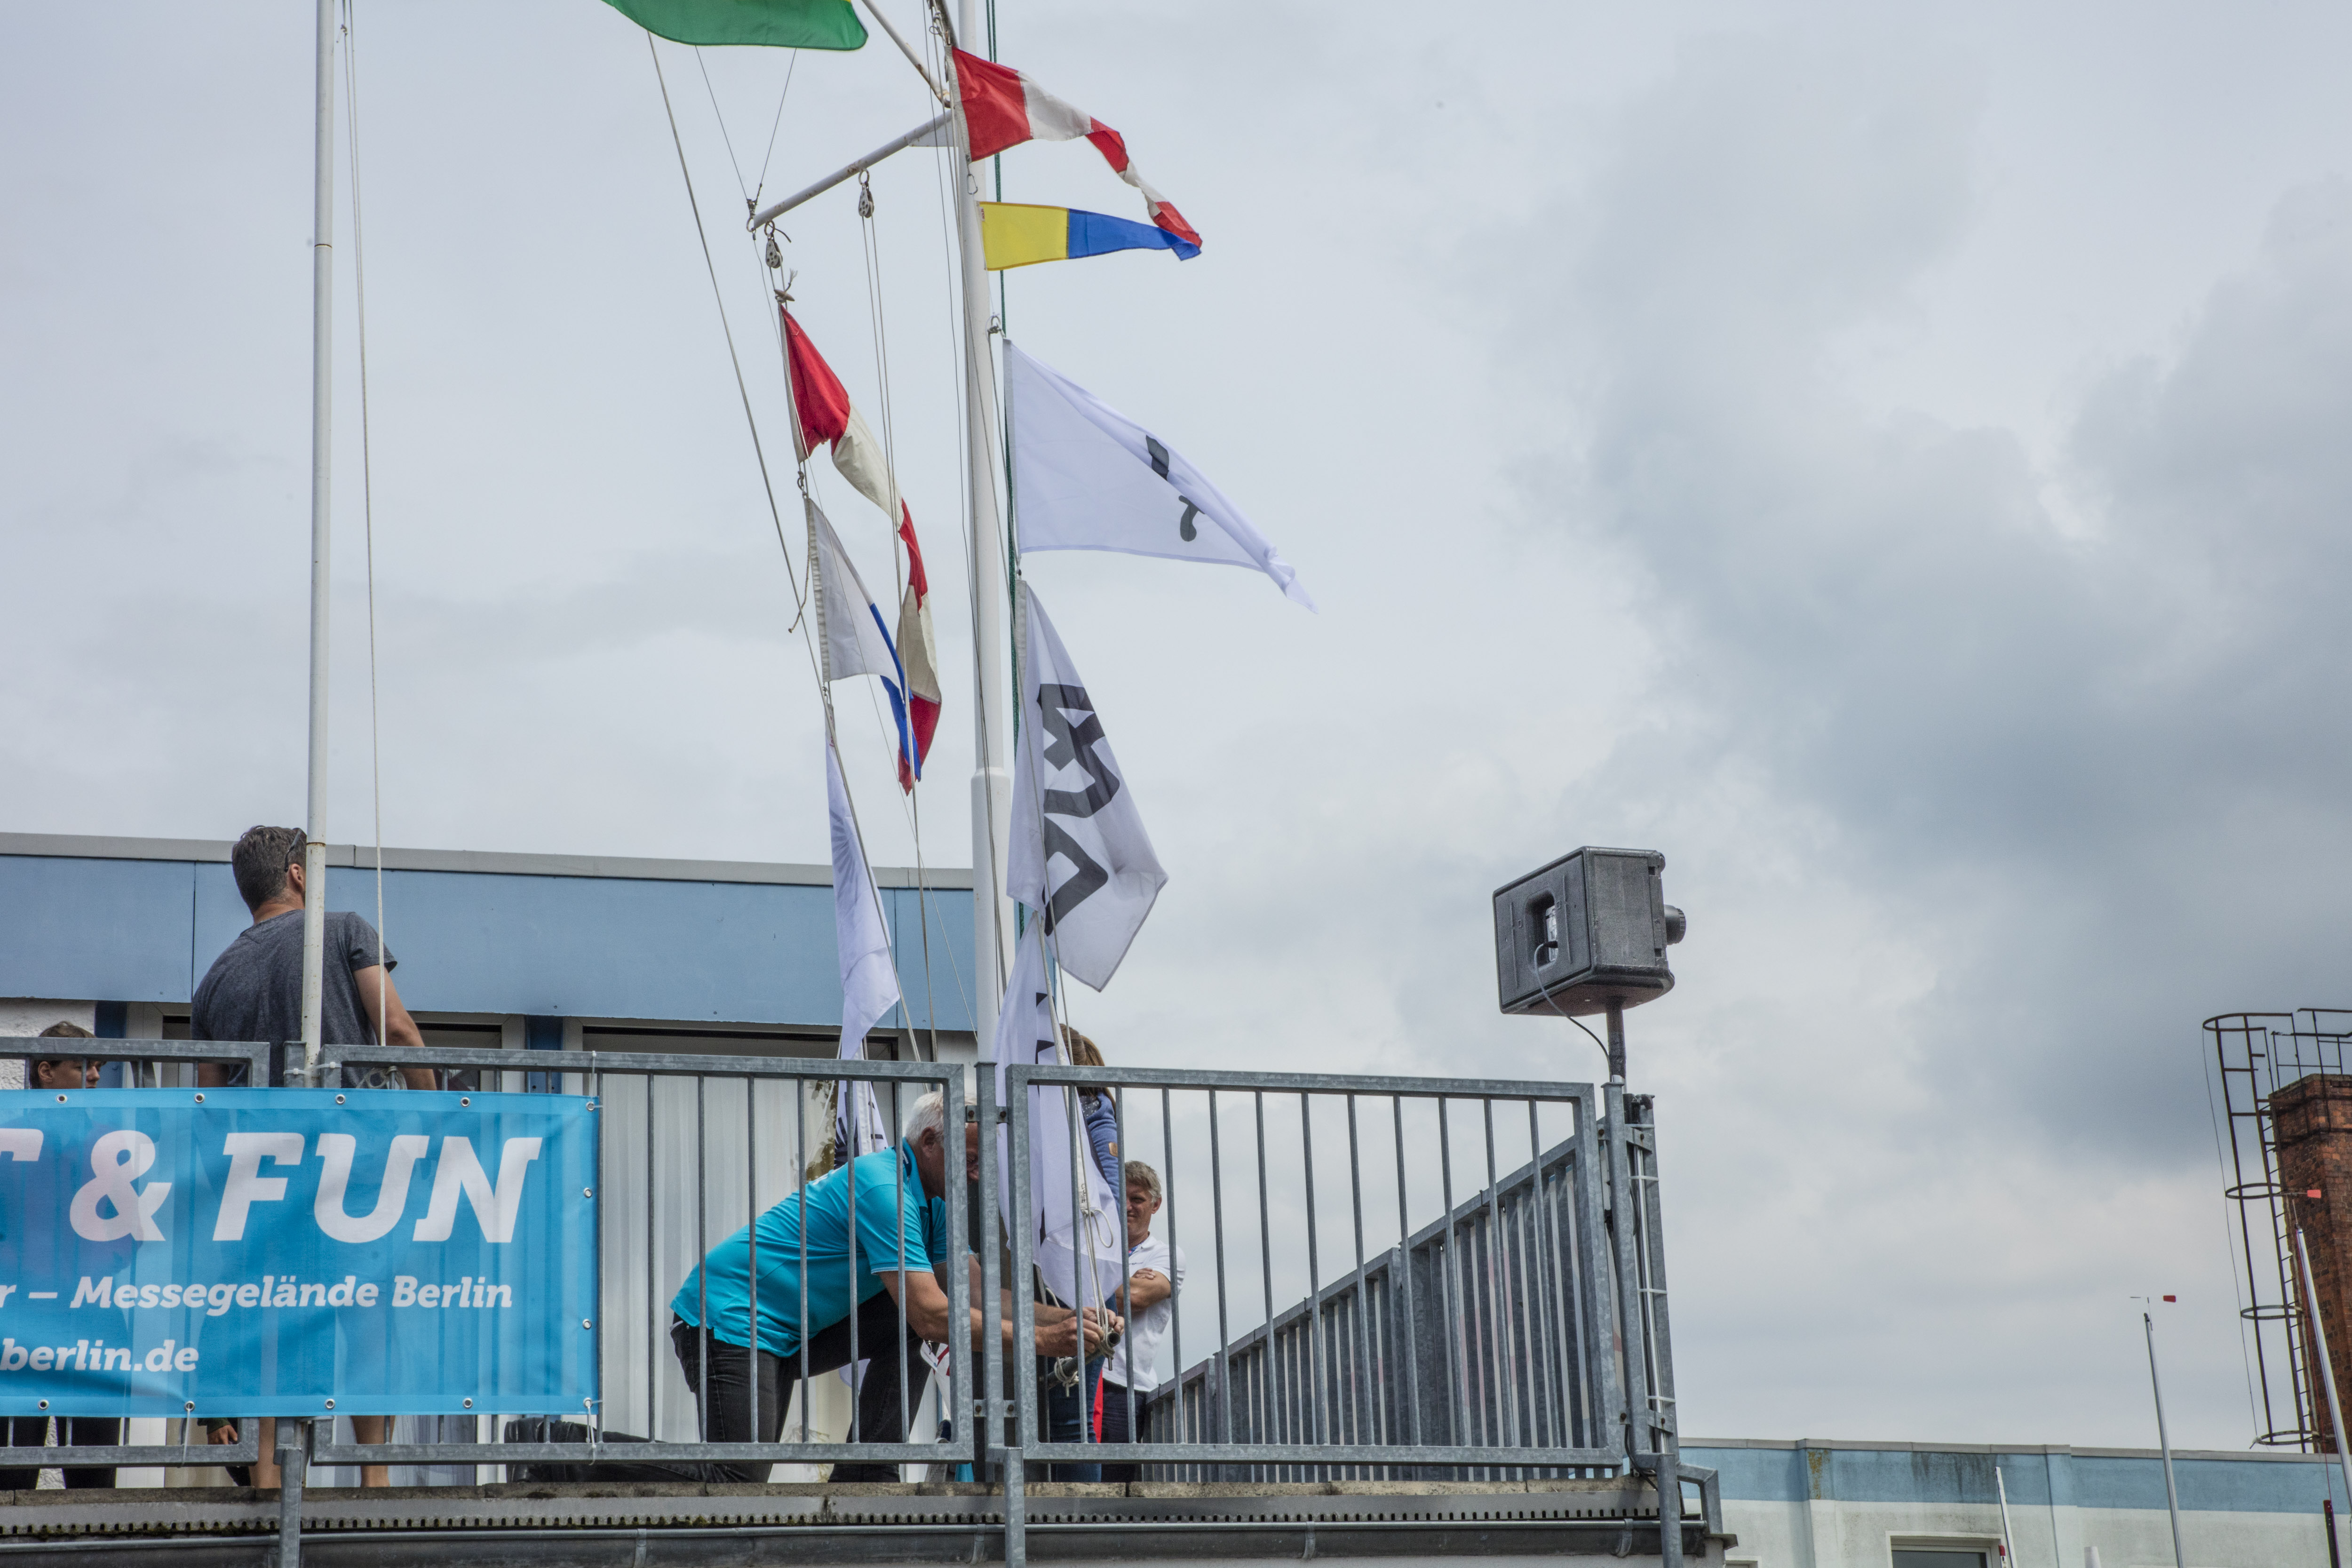  Laser  Europacup 2019  Warnemuende GER  Day 2  No wind, the Swiss